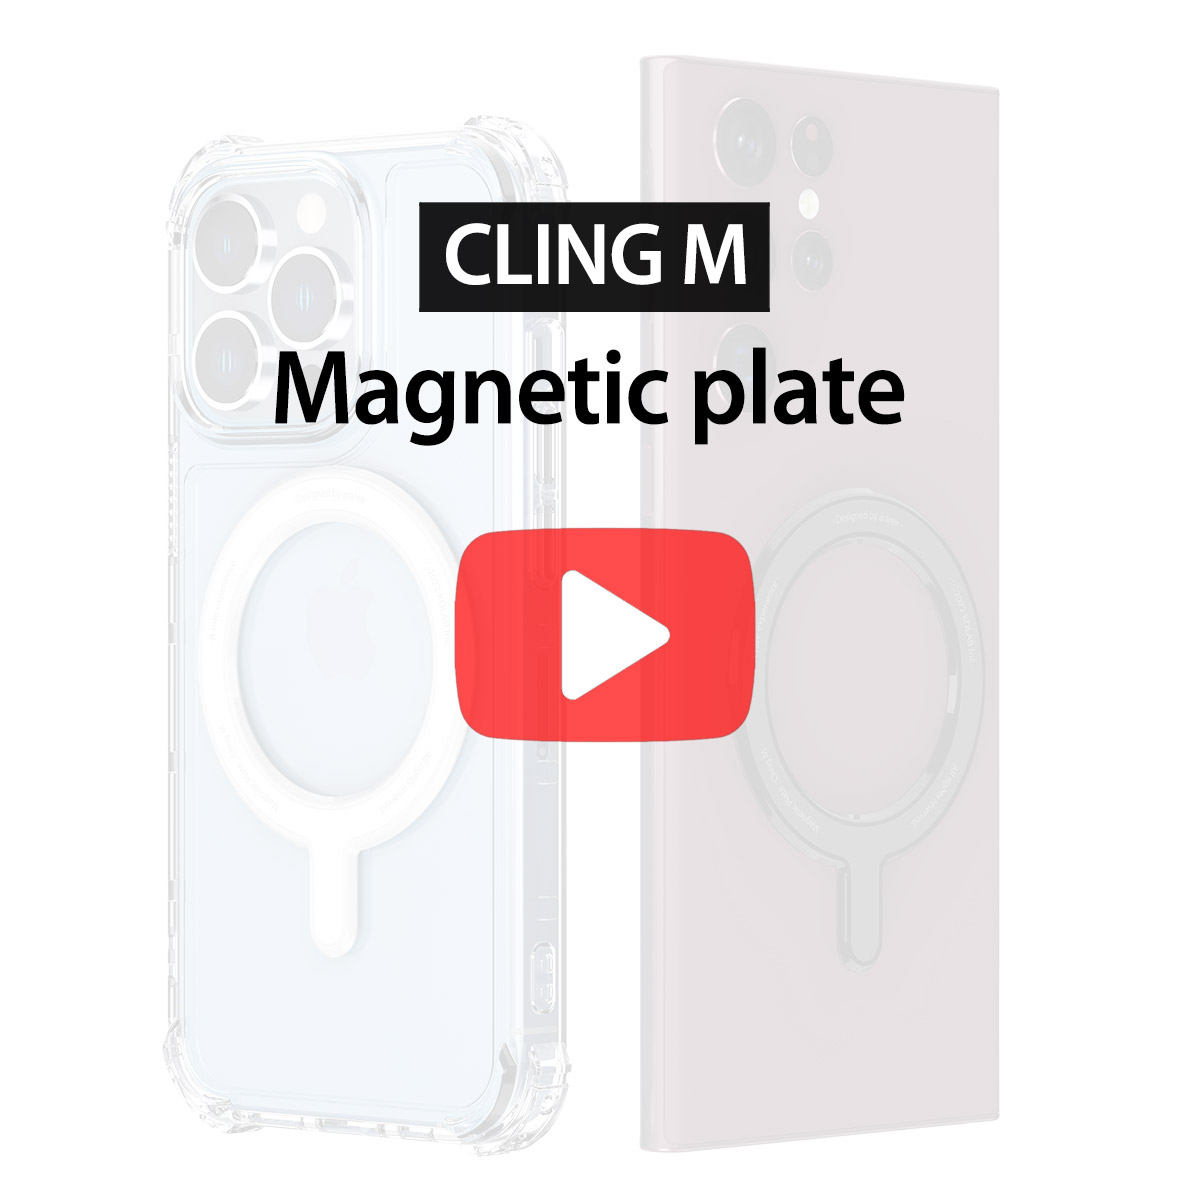 [Magnetic plate] CLING M